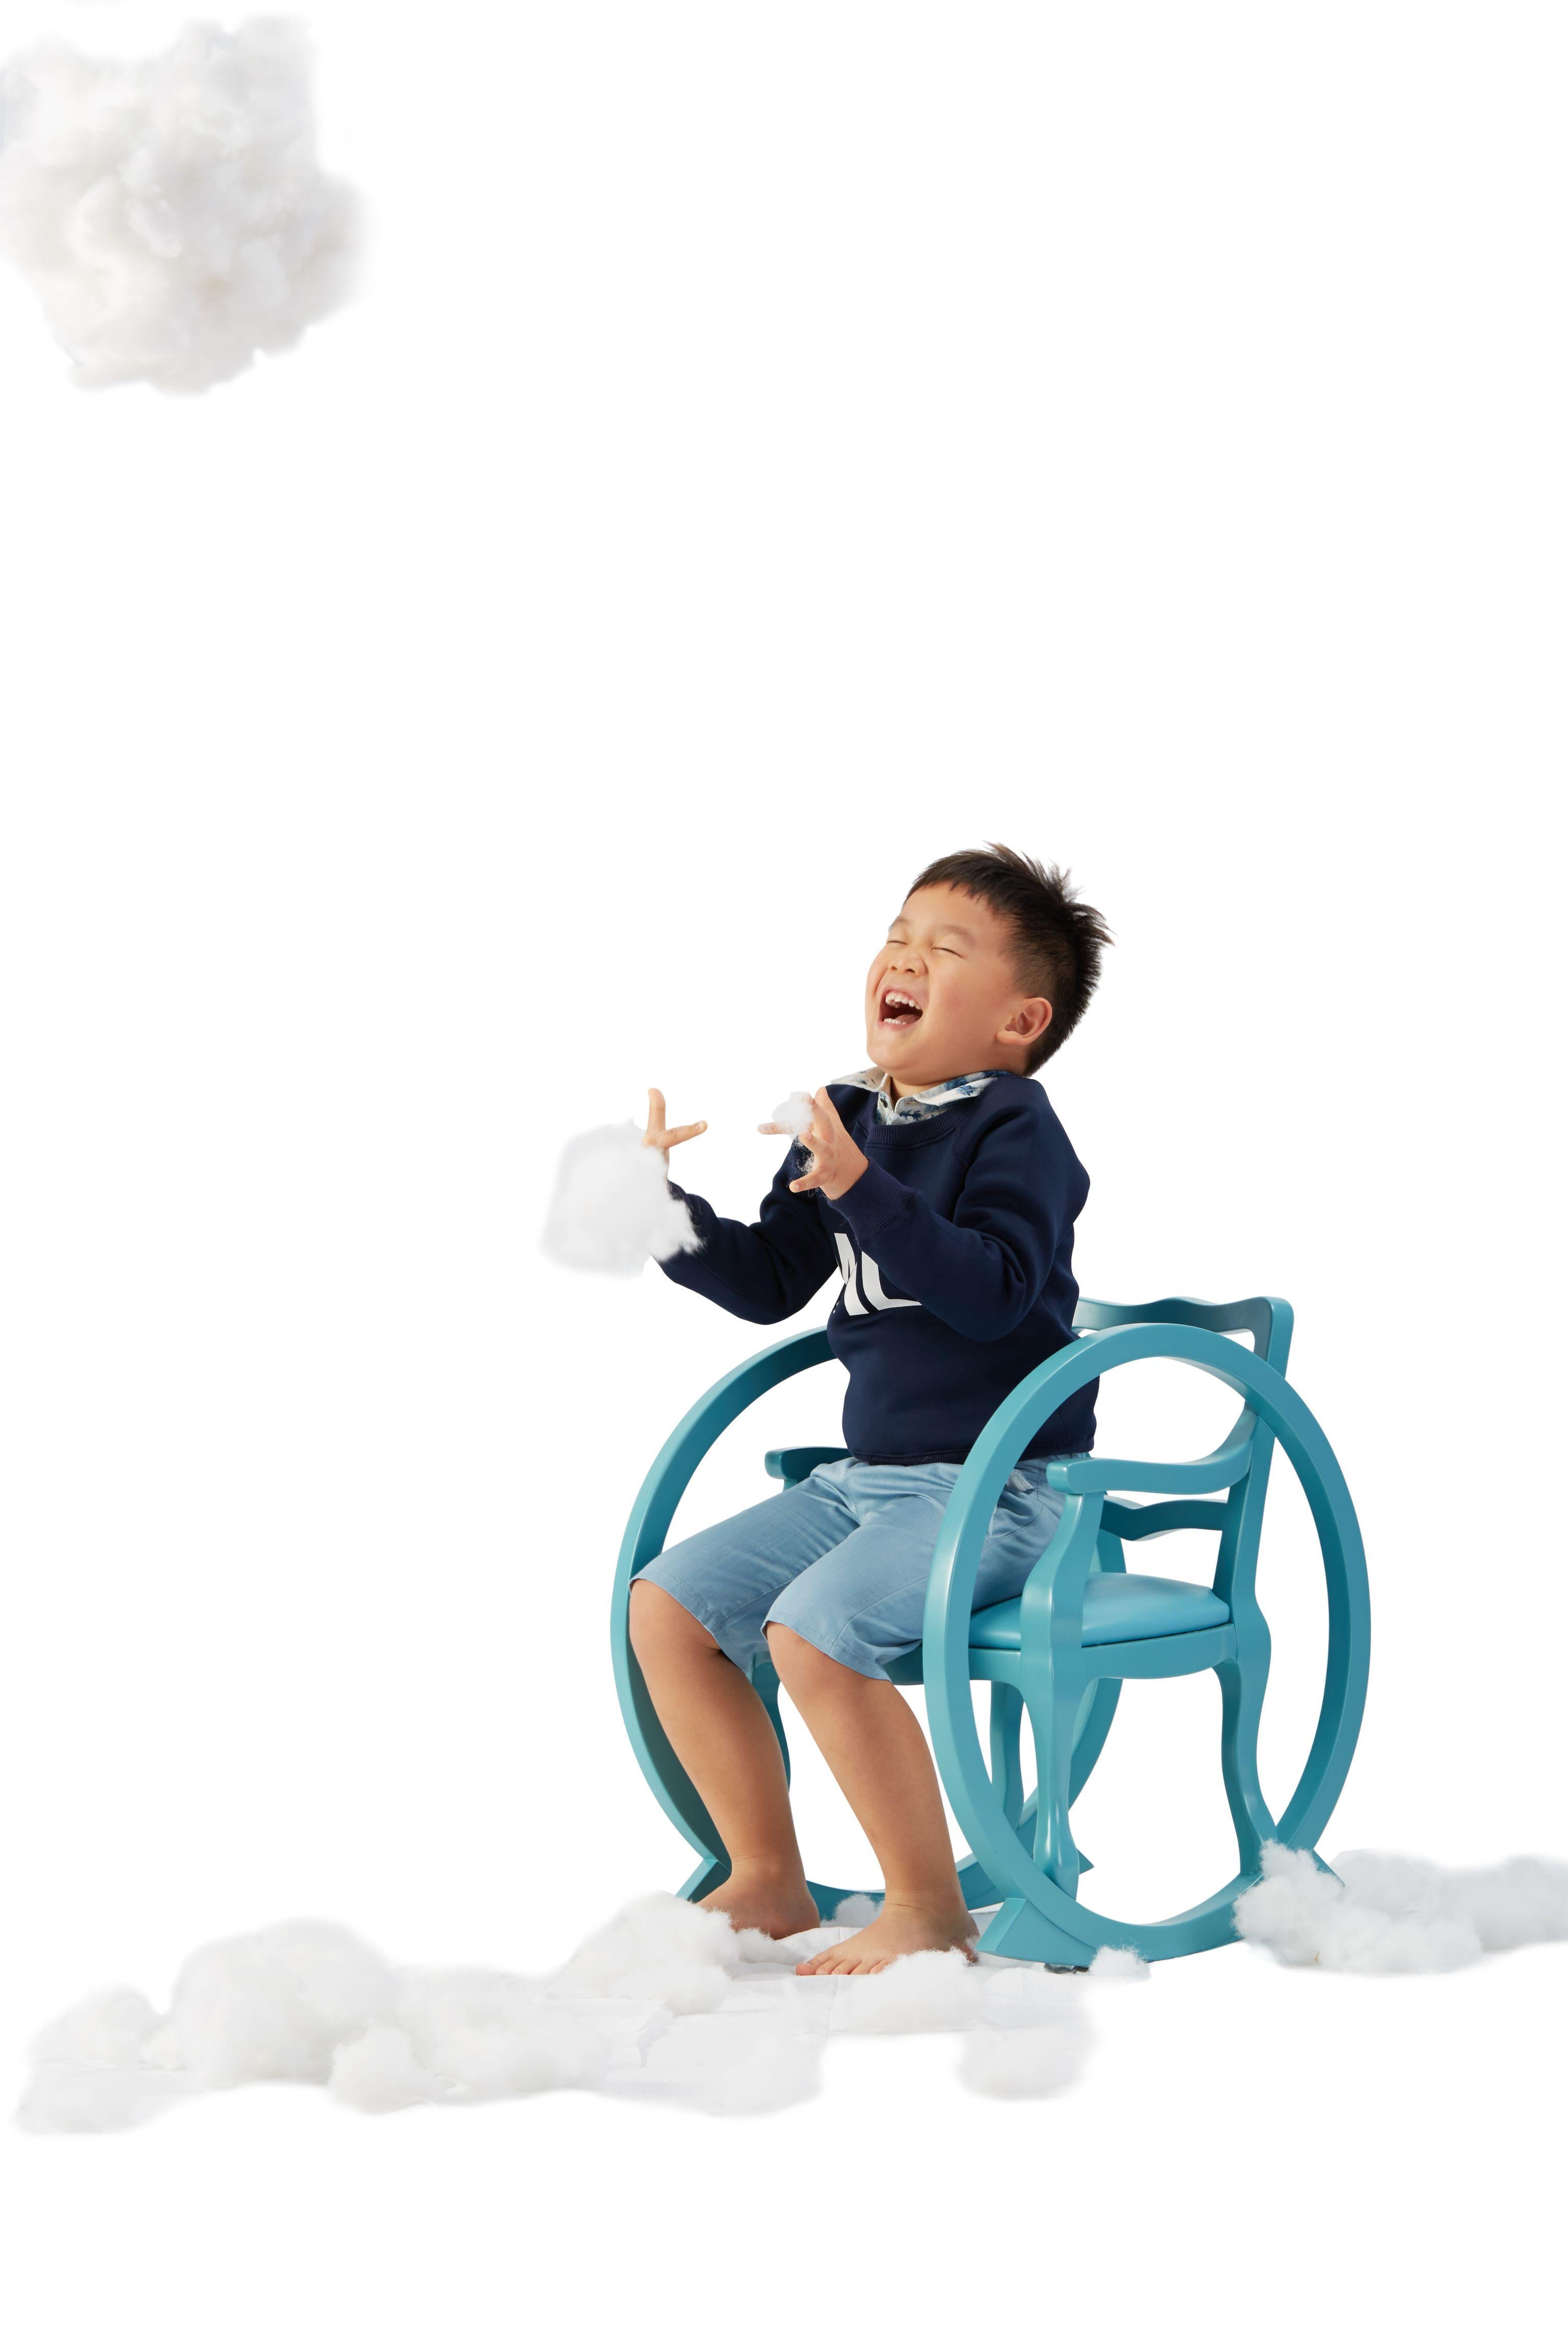 Kids contemporary rocking chair designed by Thomas Dariel, Maison Dada
Measures: W 45.5 x D 55 x H 56 cm
Structure in solid beech with matte painted finish
Upholstery in leather
Available in 2 colors (Sky Blue or Dusty Pink)
Tick-tock,